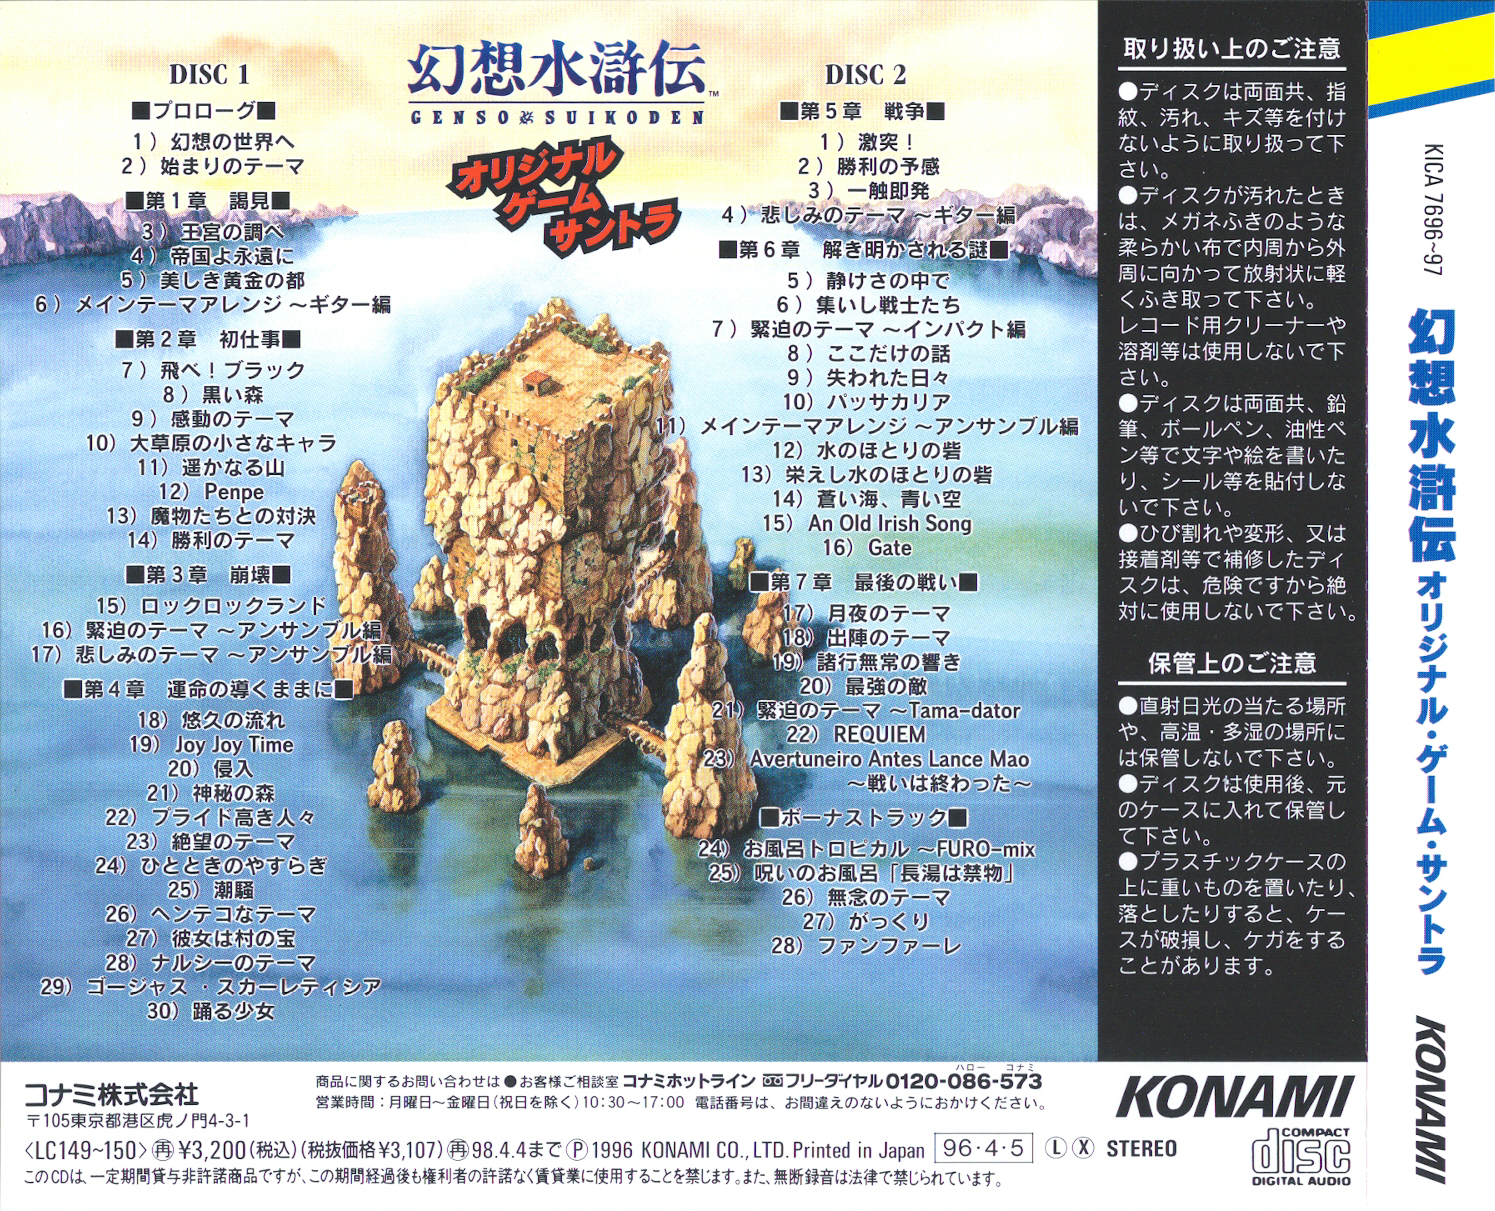 Genso Suikoden Original Game Soundtrack Mp3 Download Genso Suikoden Original Game Soundtrack Soundtracks For Free